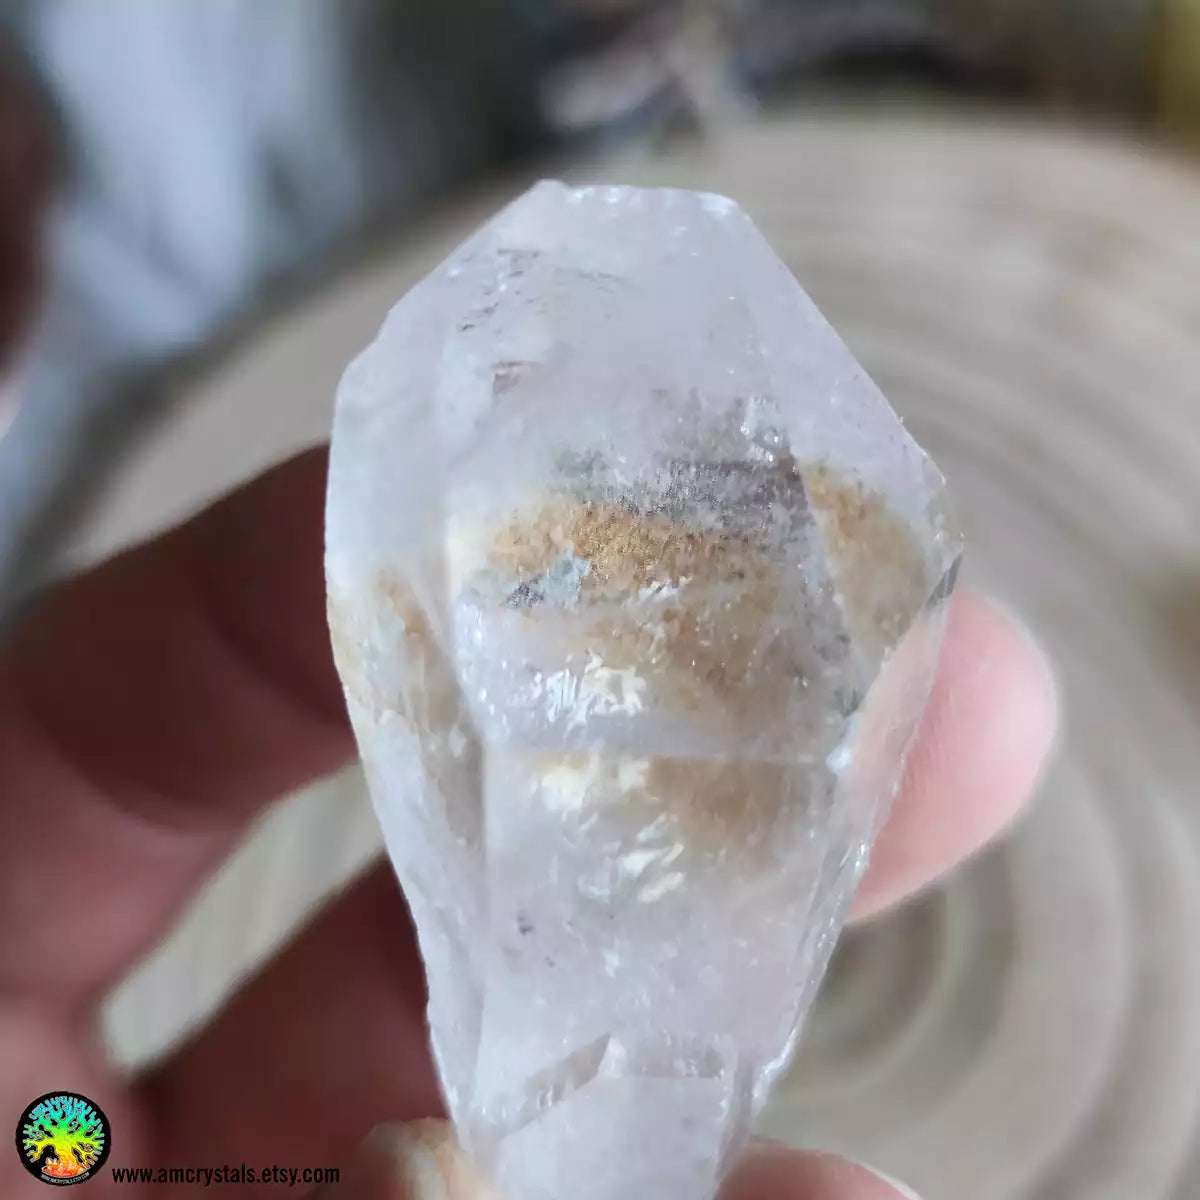 Clear Quartz with Chlorite Inclusions nr.8